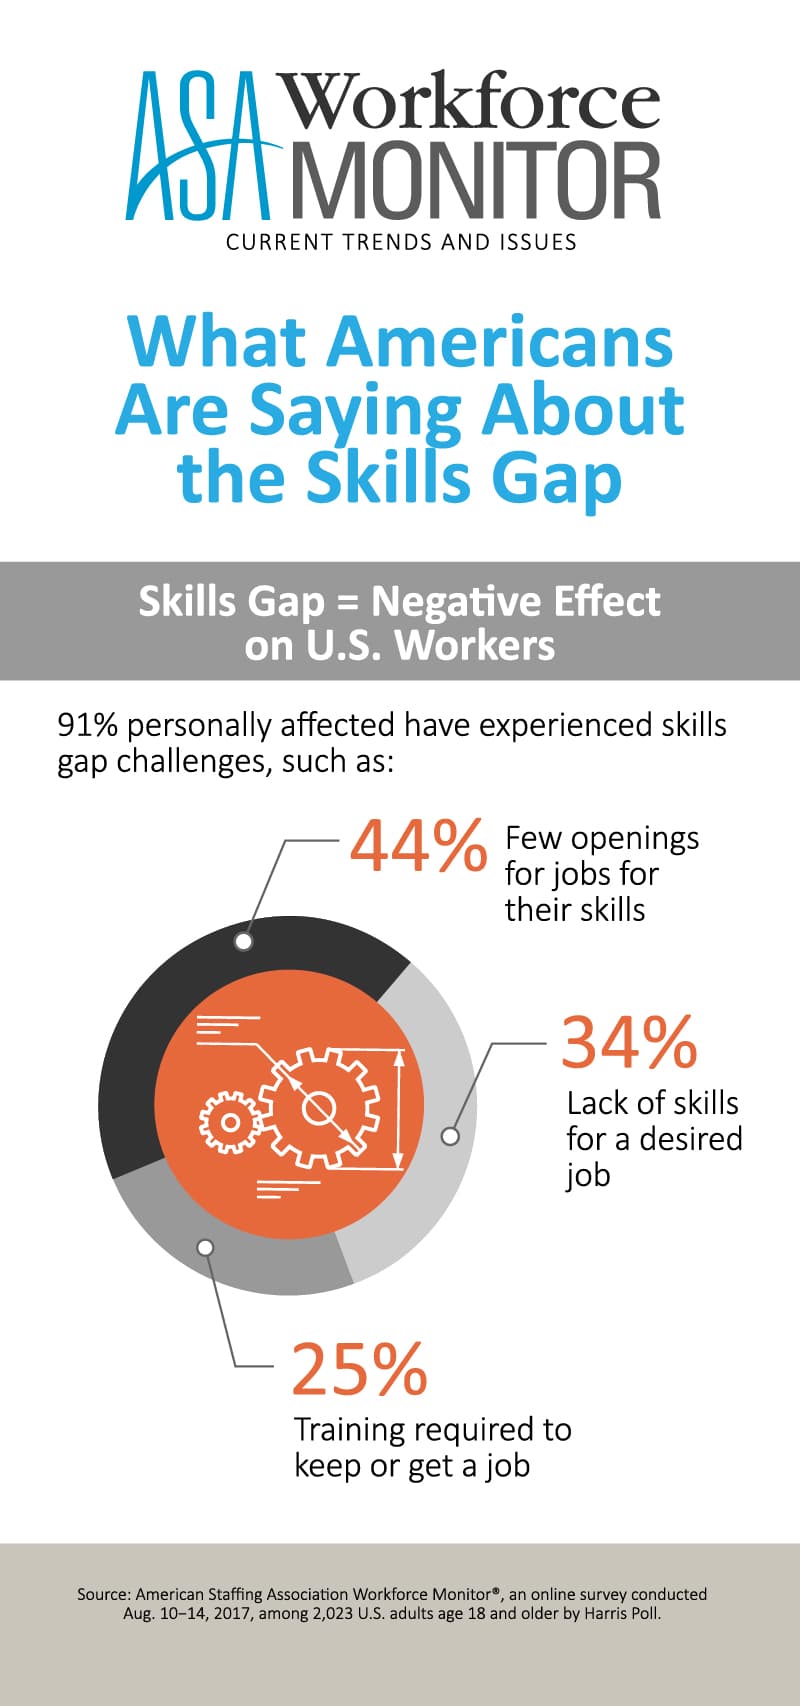 skills gap,' once defined, now unfamiliar to half of americans